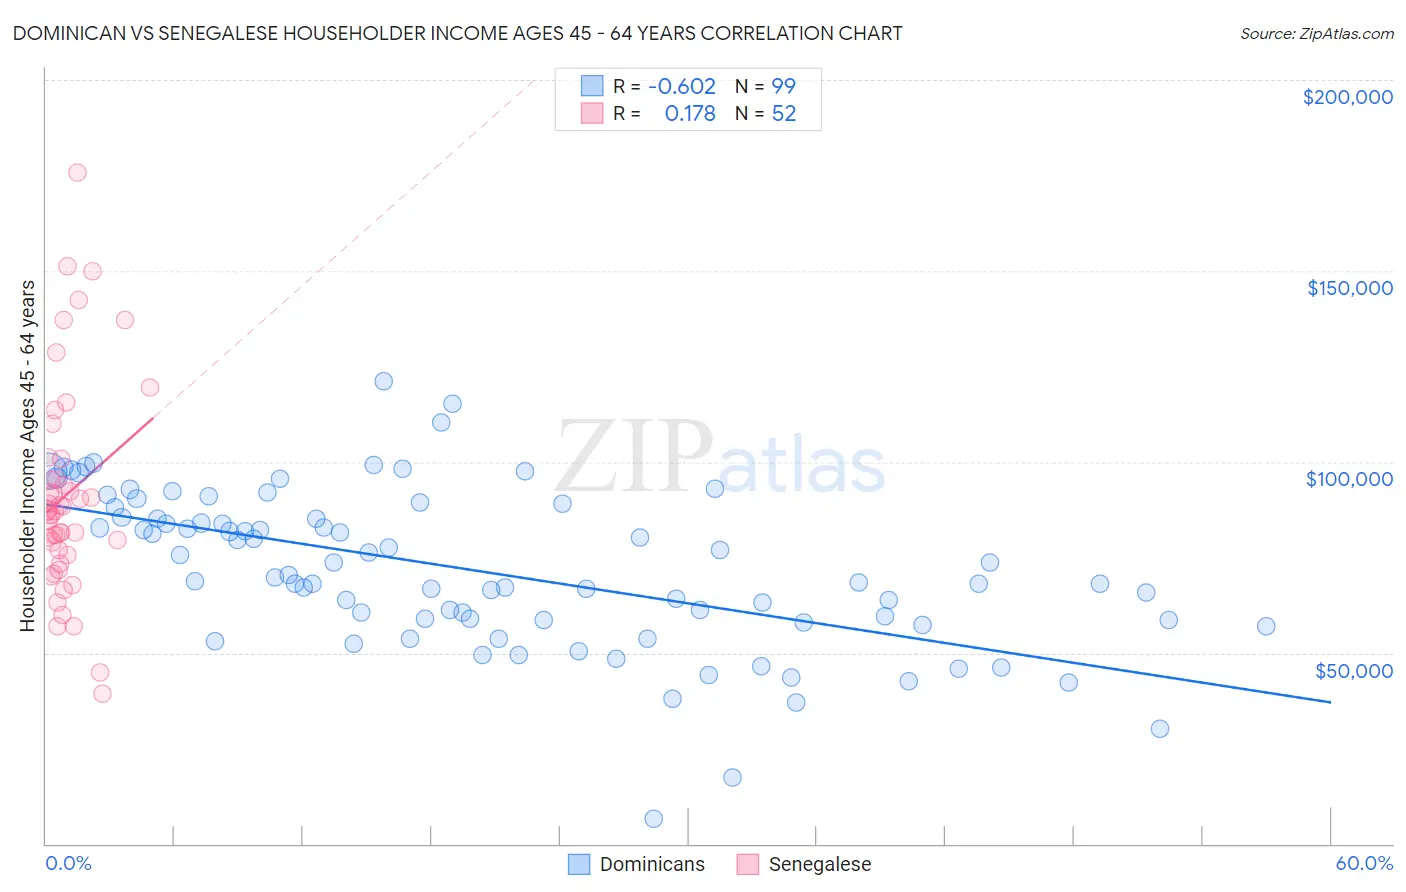 Dominican vs Senegalese Householder Income Ages 45 - 64 years